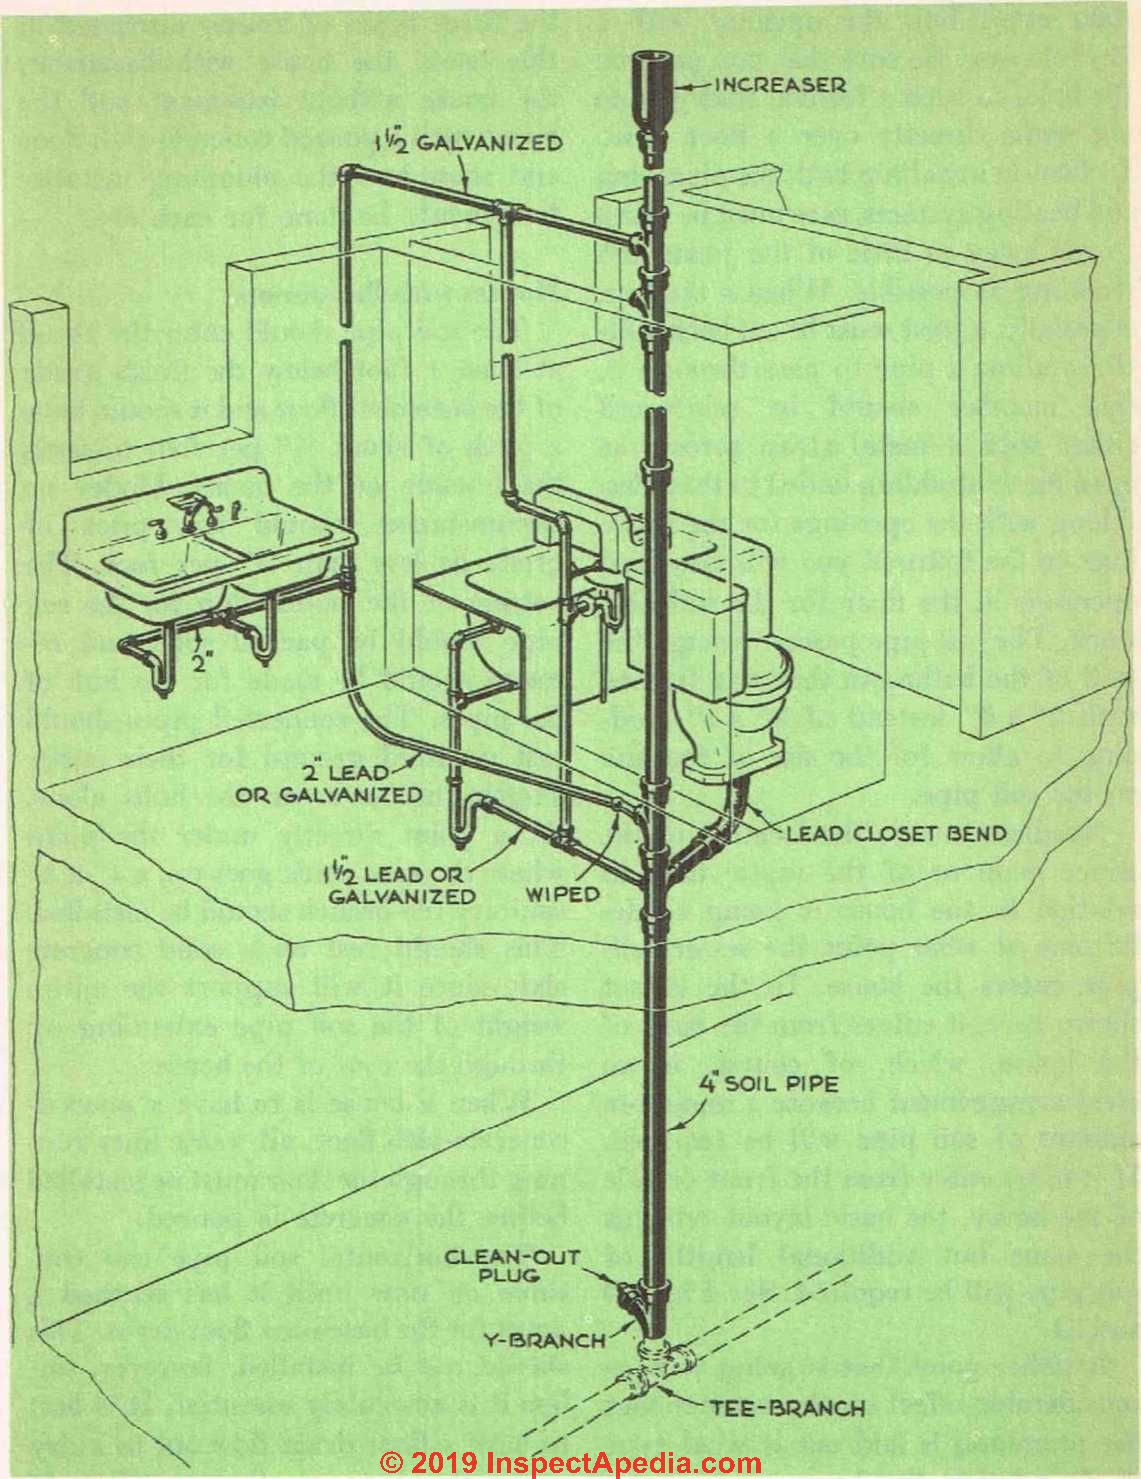 House Plumbing Schematic Drawing